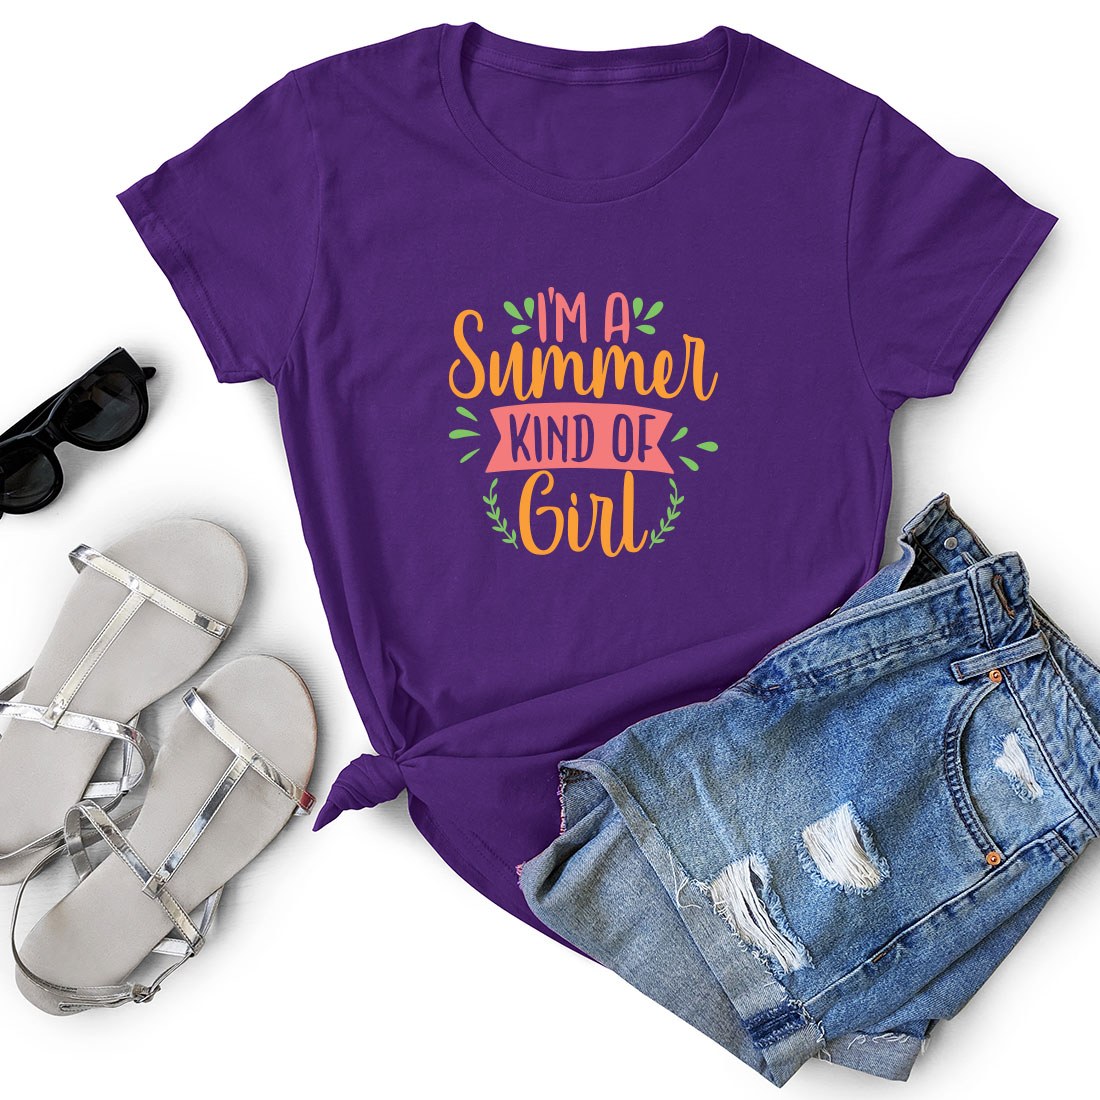 T - shirt that says i'm a summer kind of girl next to.